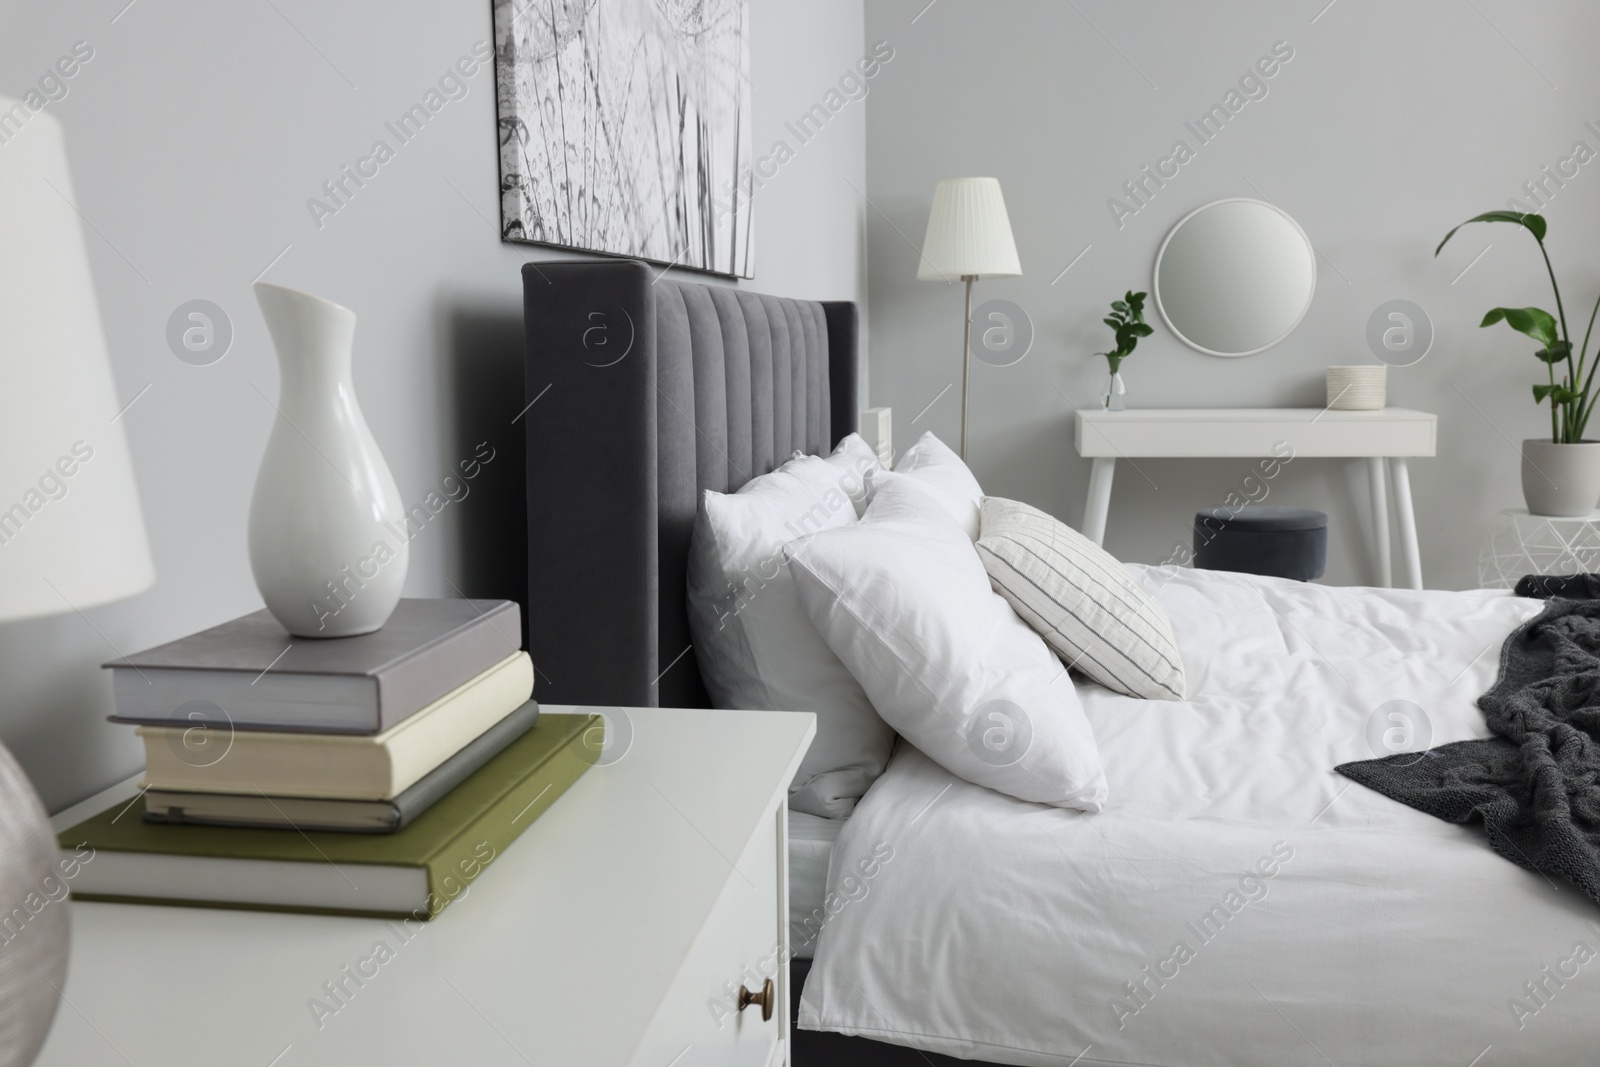 Photo of Stylish bedroom interior with large comfortable bed, chest of drawers and dressing table